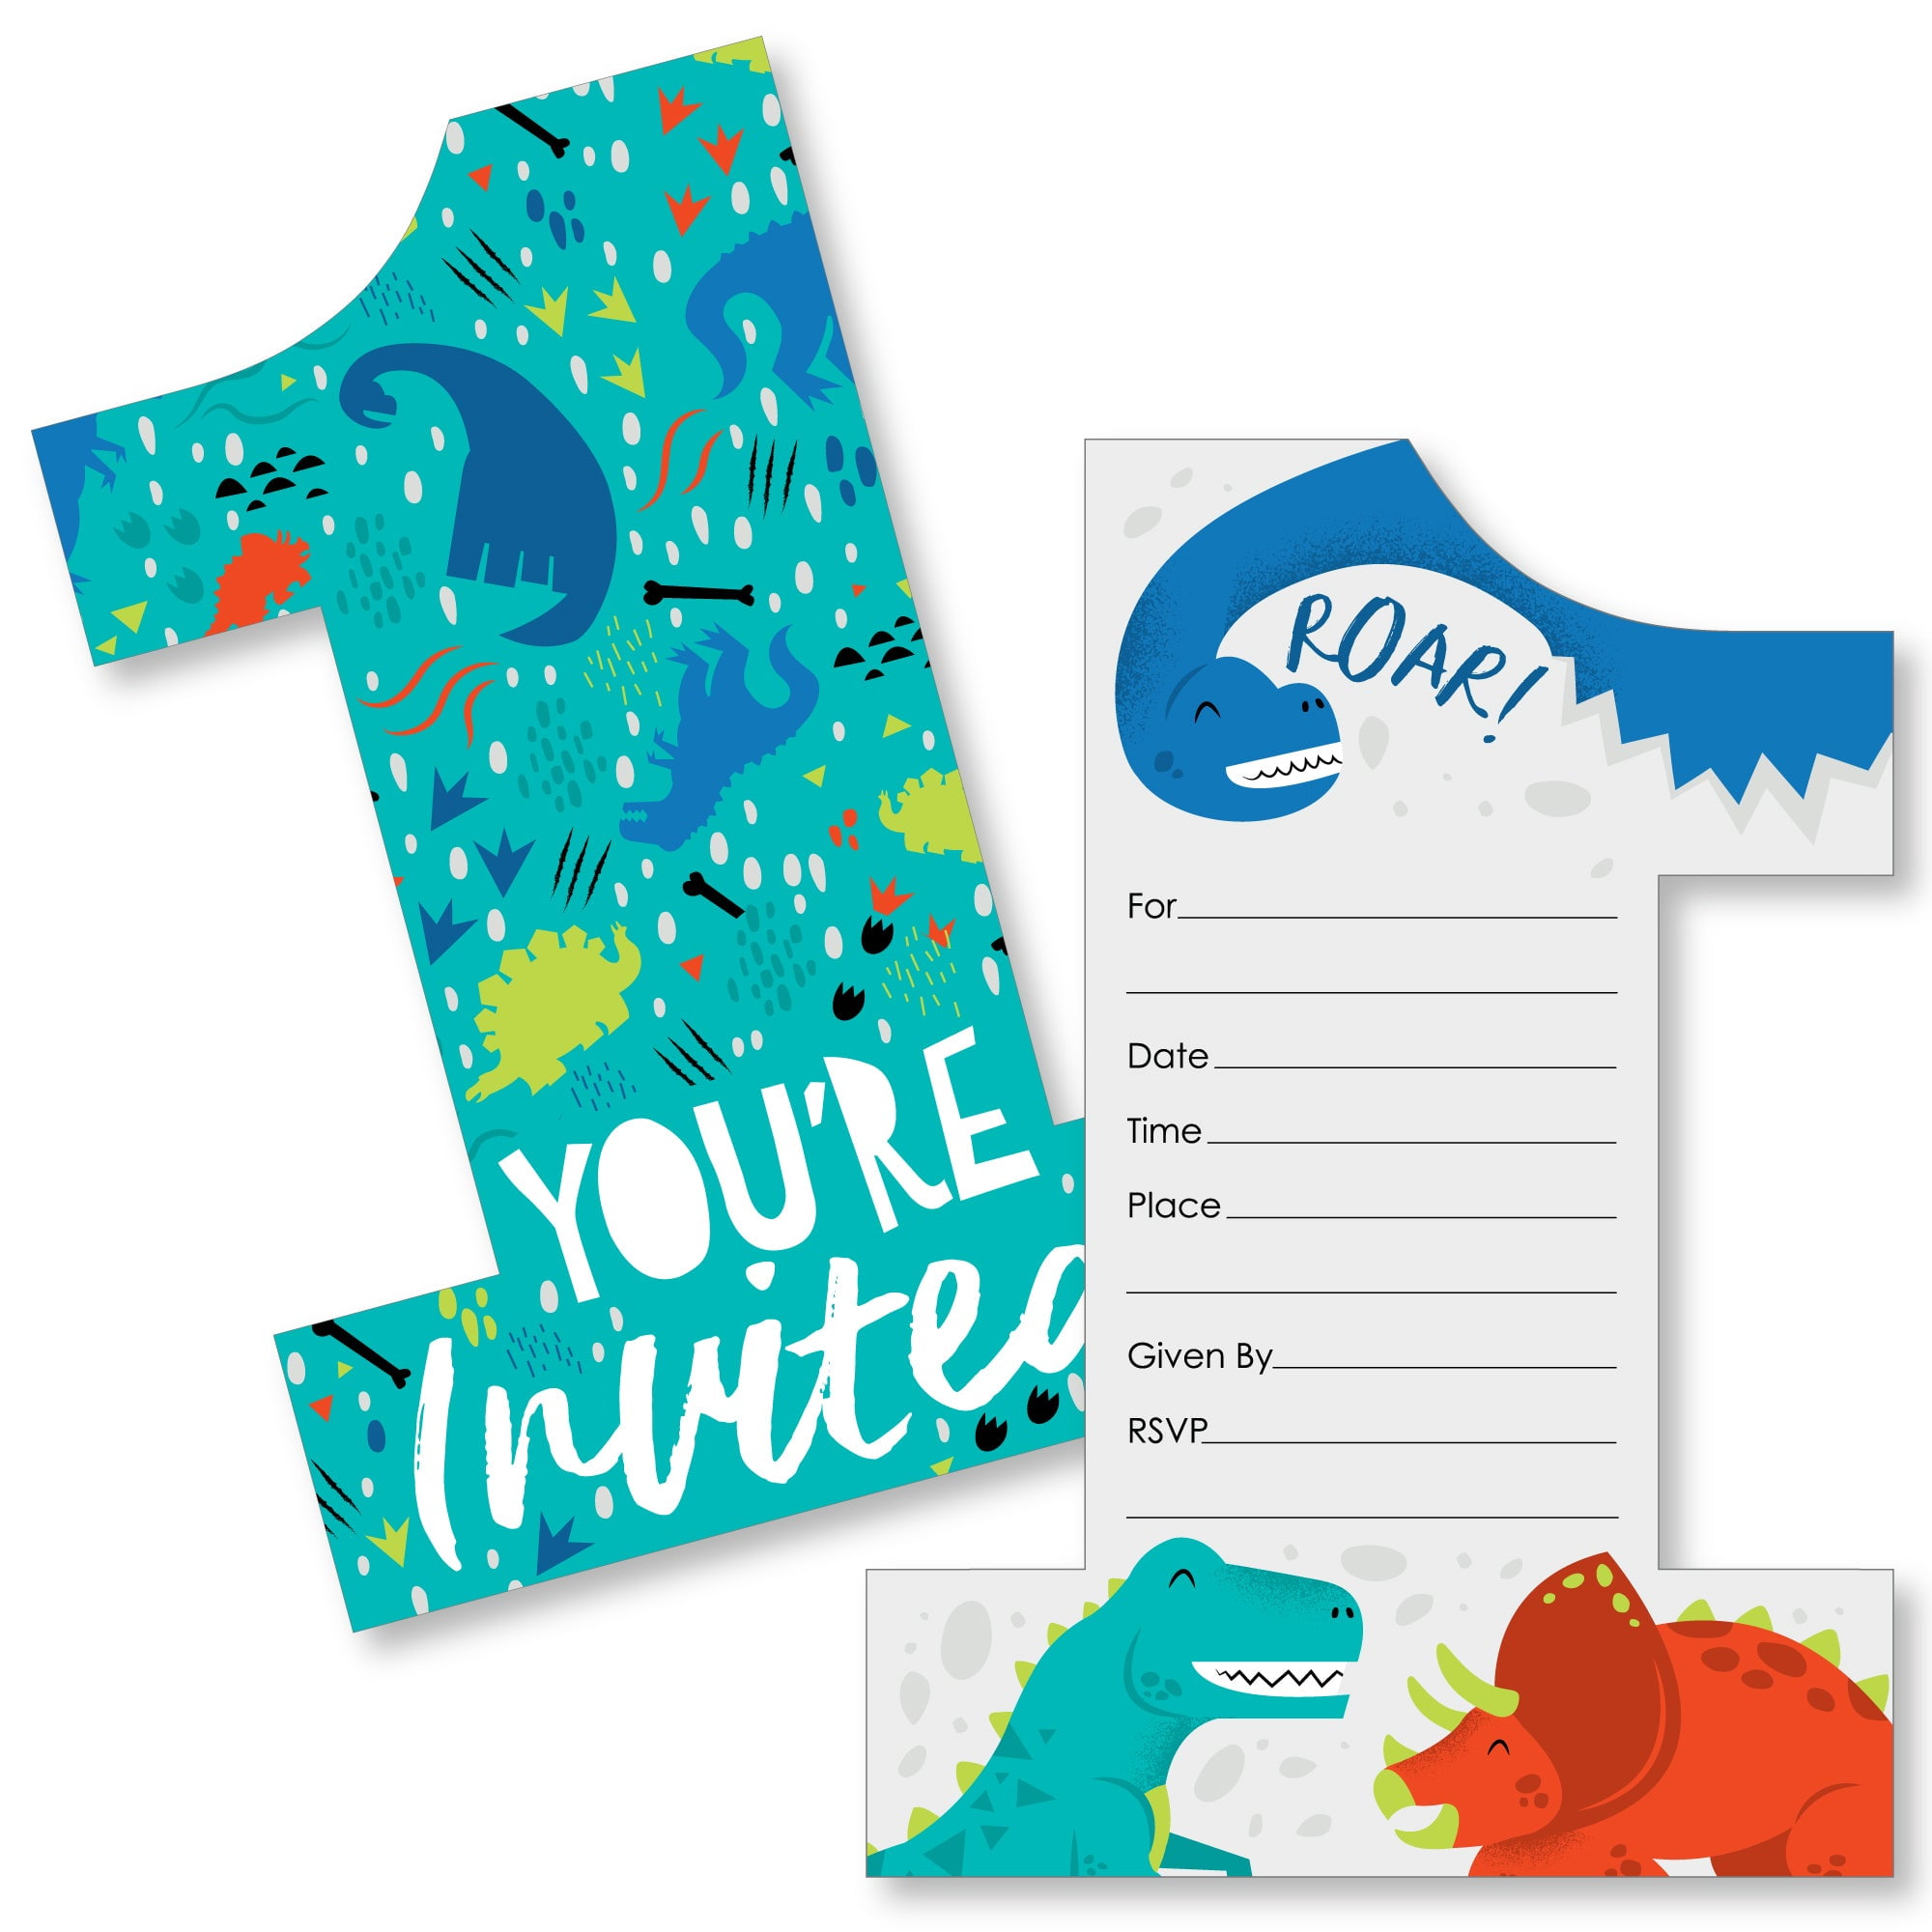 Dinosaur Game for Kids | Dino Says Game | Stay at home Activity | Dinosaur  Birthday Party | Class Printable Indoor or outdoor Game Cards